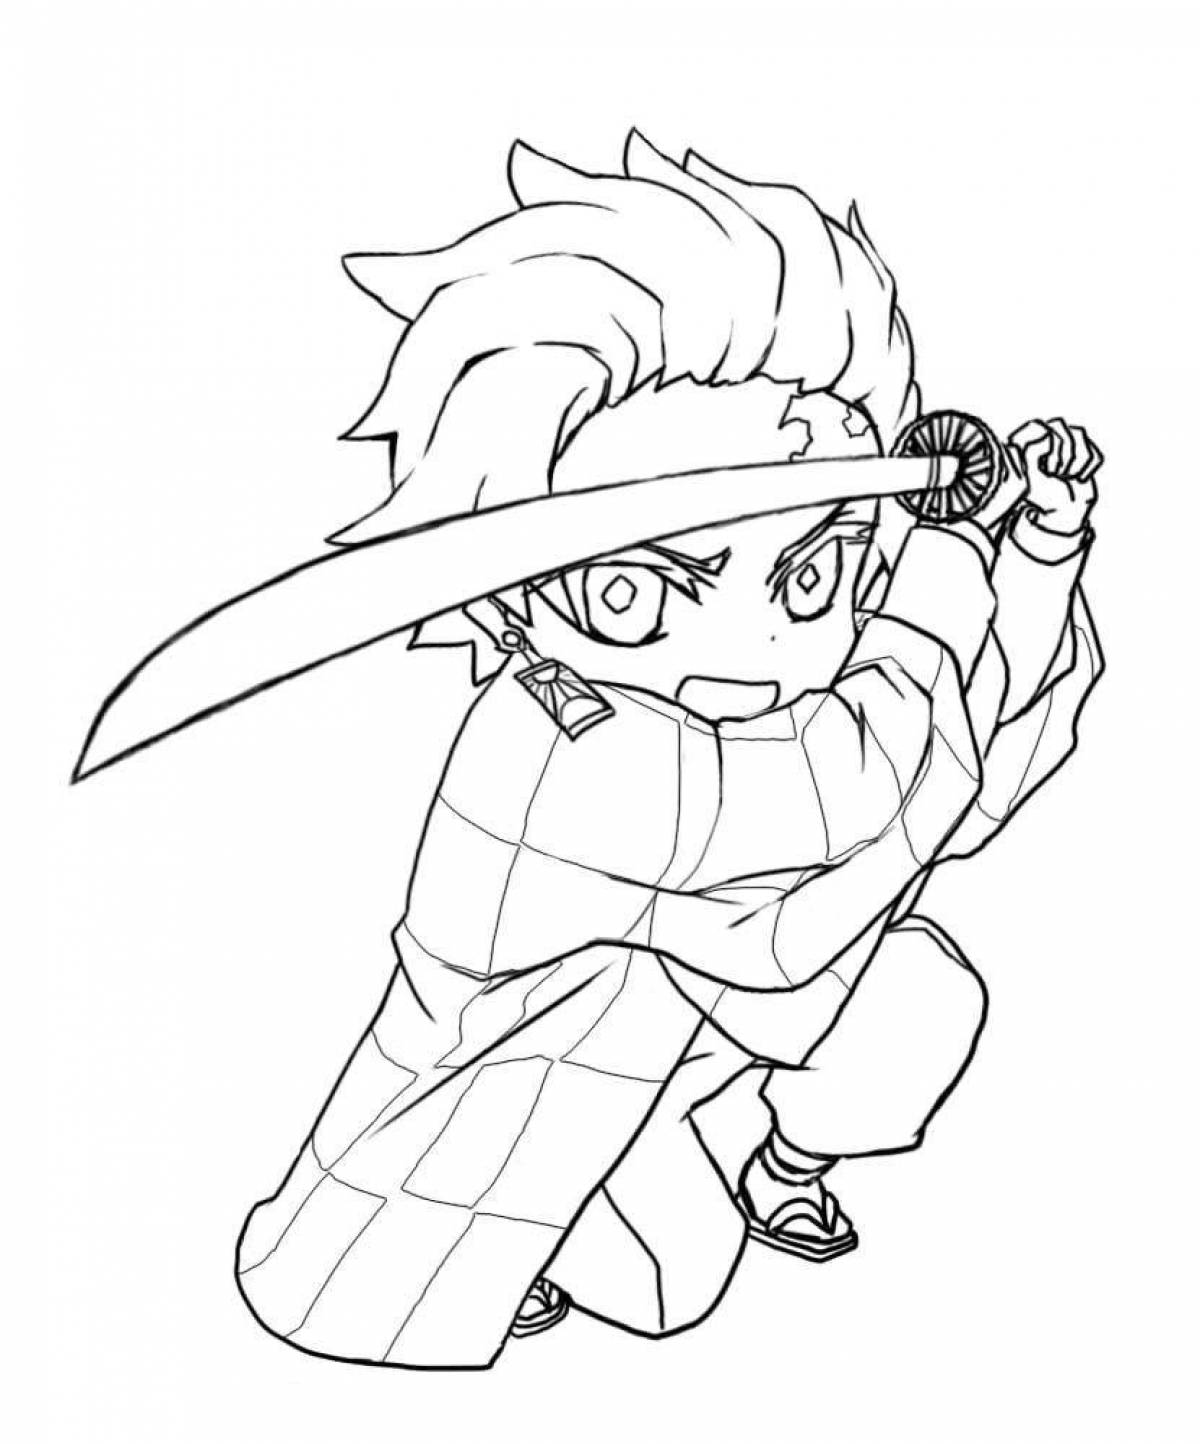 Tanjiro relaxing coloring page